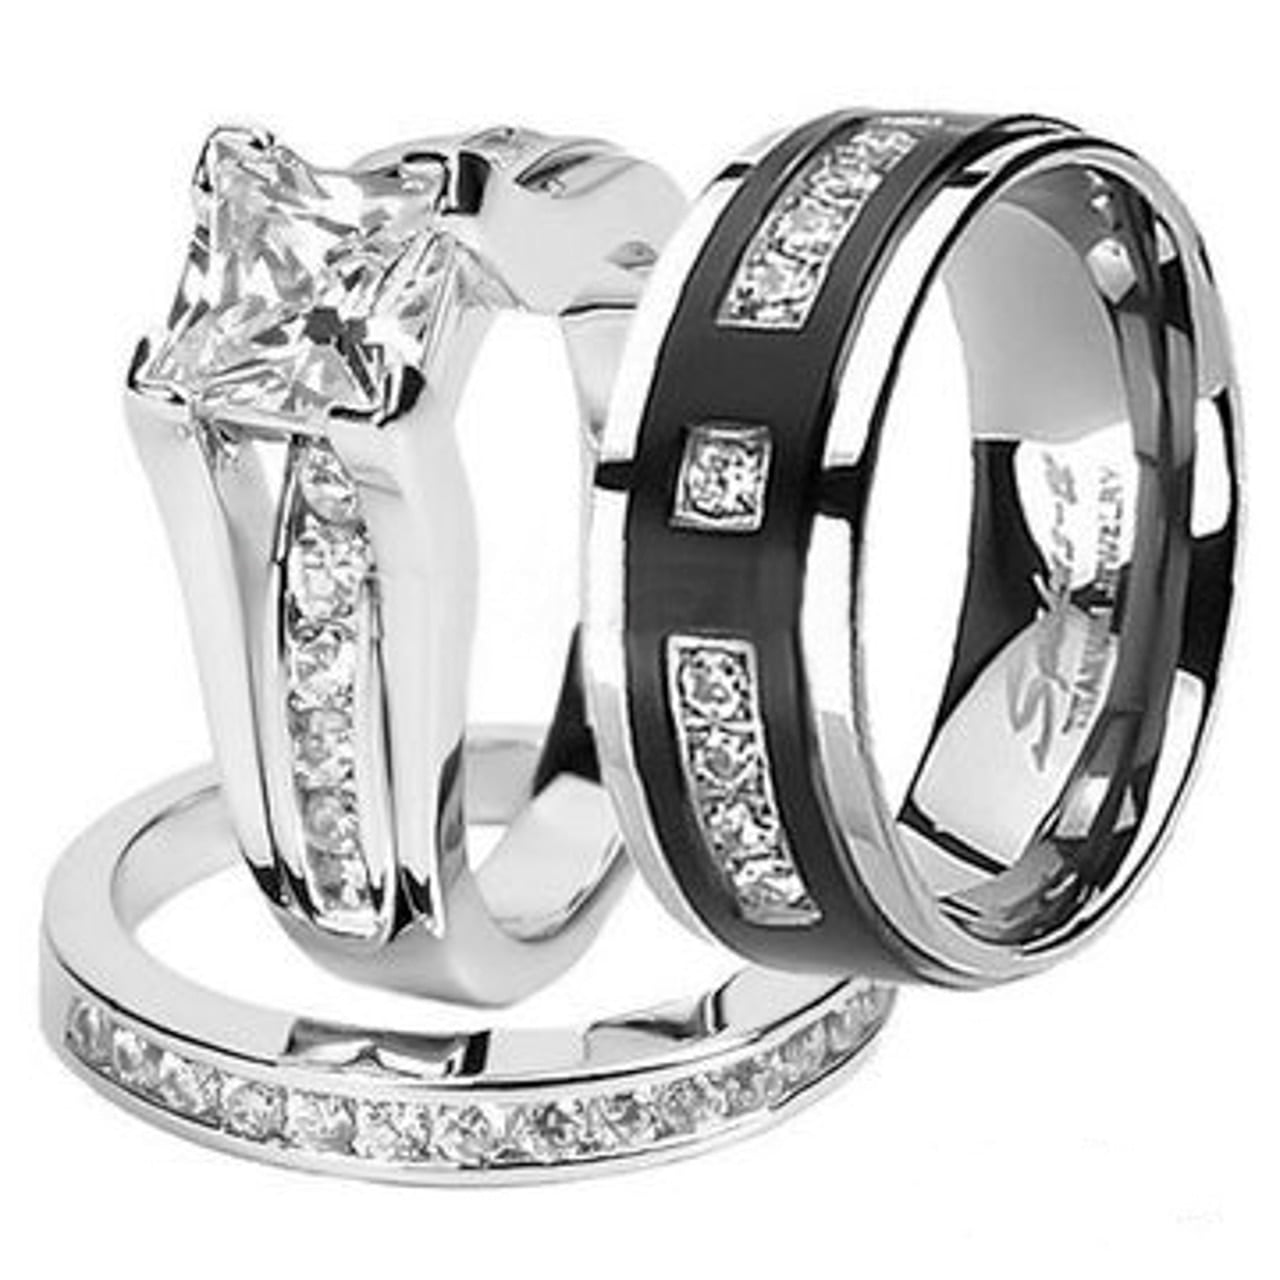 Stainless Steel Bands. 038 Stainless Steel Ring Set Set of Stainless Steel Wedding Bands Women Size 5.5 and Men 9.5